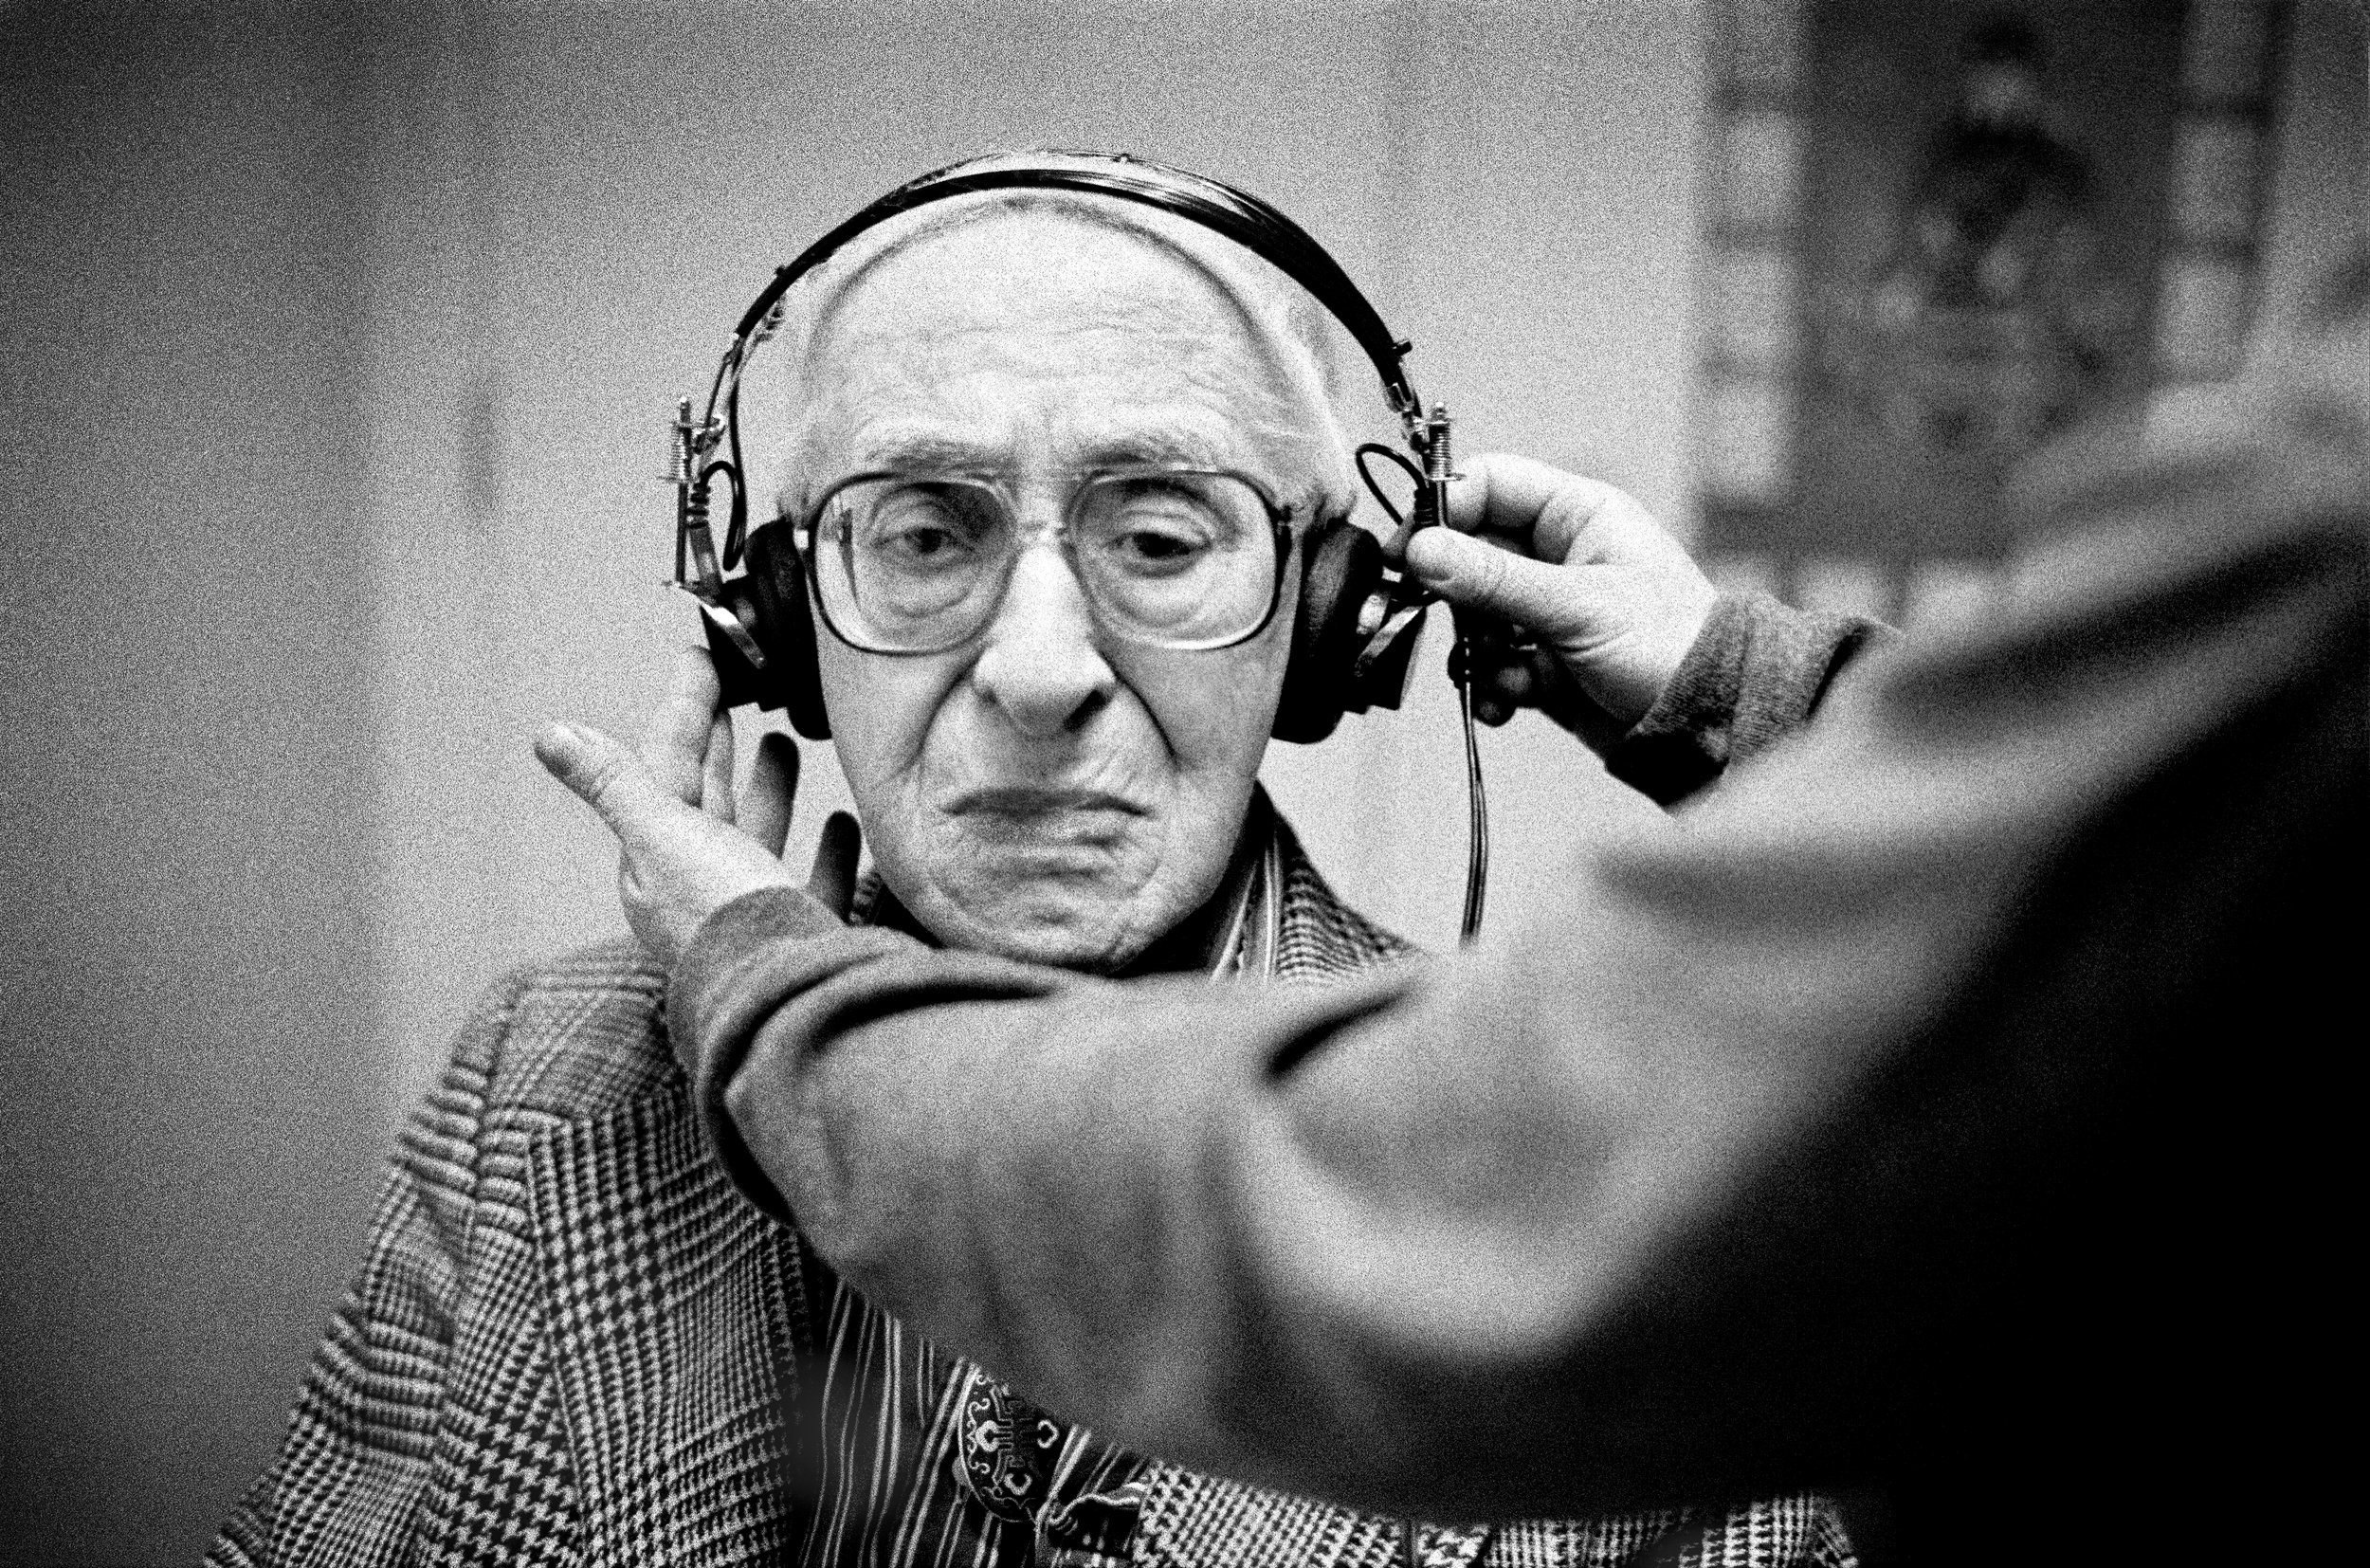  Almost deaf, 100-year-old Isaac Donner has his hearing tested at the On Lok medical facility in San Francisco. 1999 